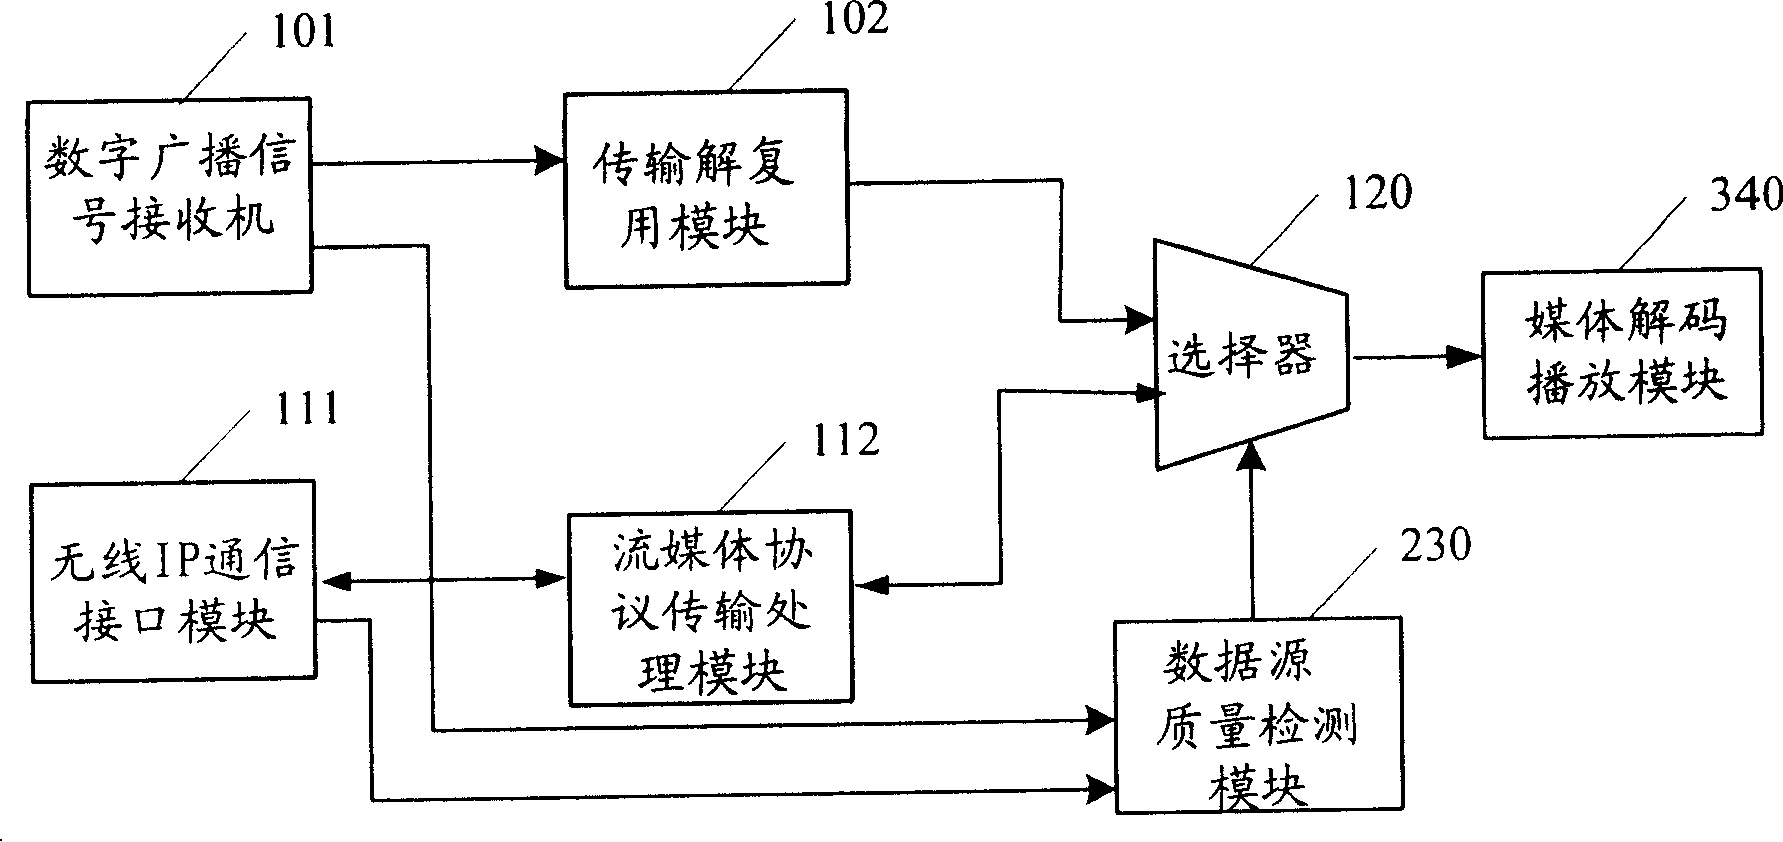 A dual mode mobile receiving device and its receiving method